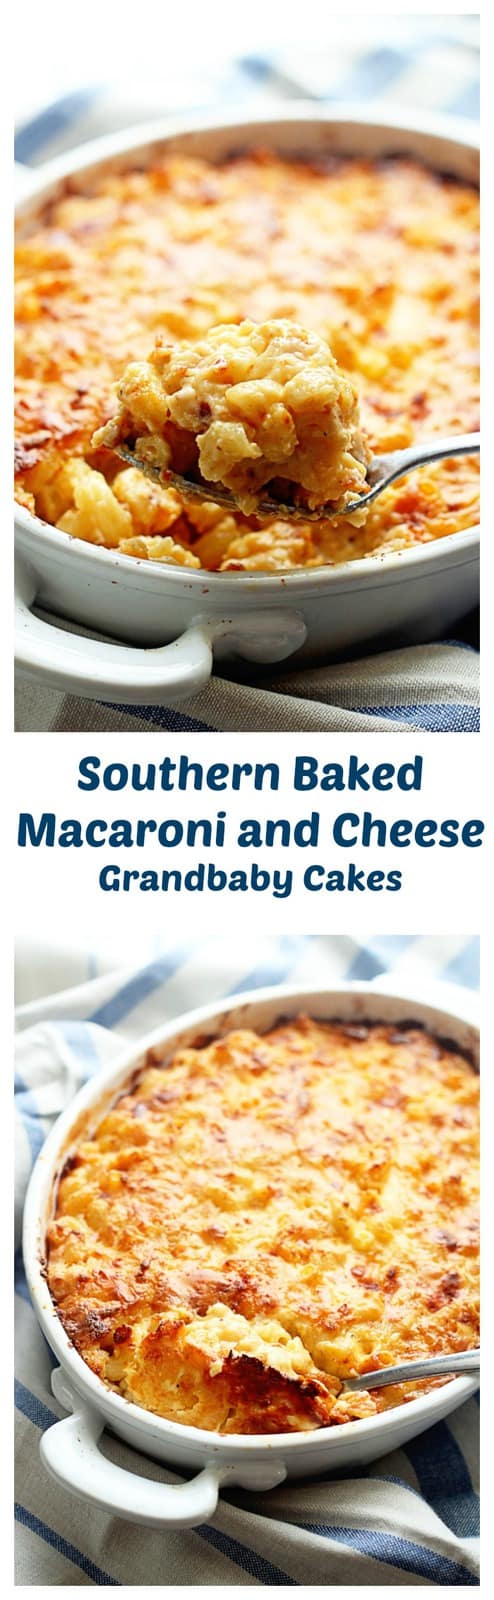 Southern Baked Macaroni and Cheese! (With Video!) - Grandbaby Cakes